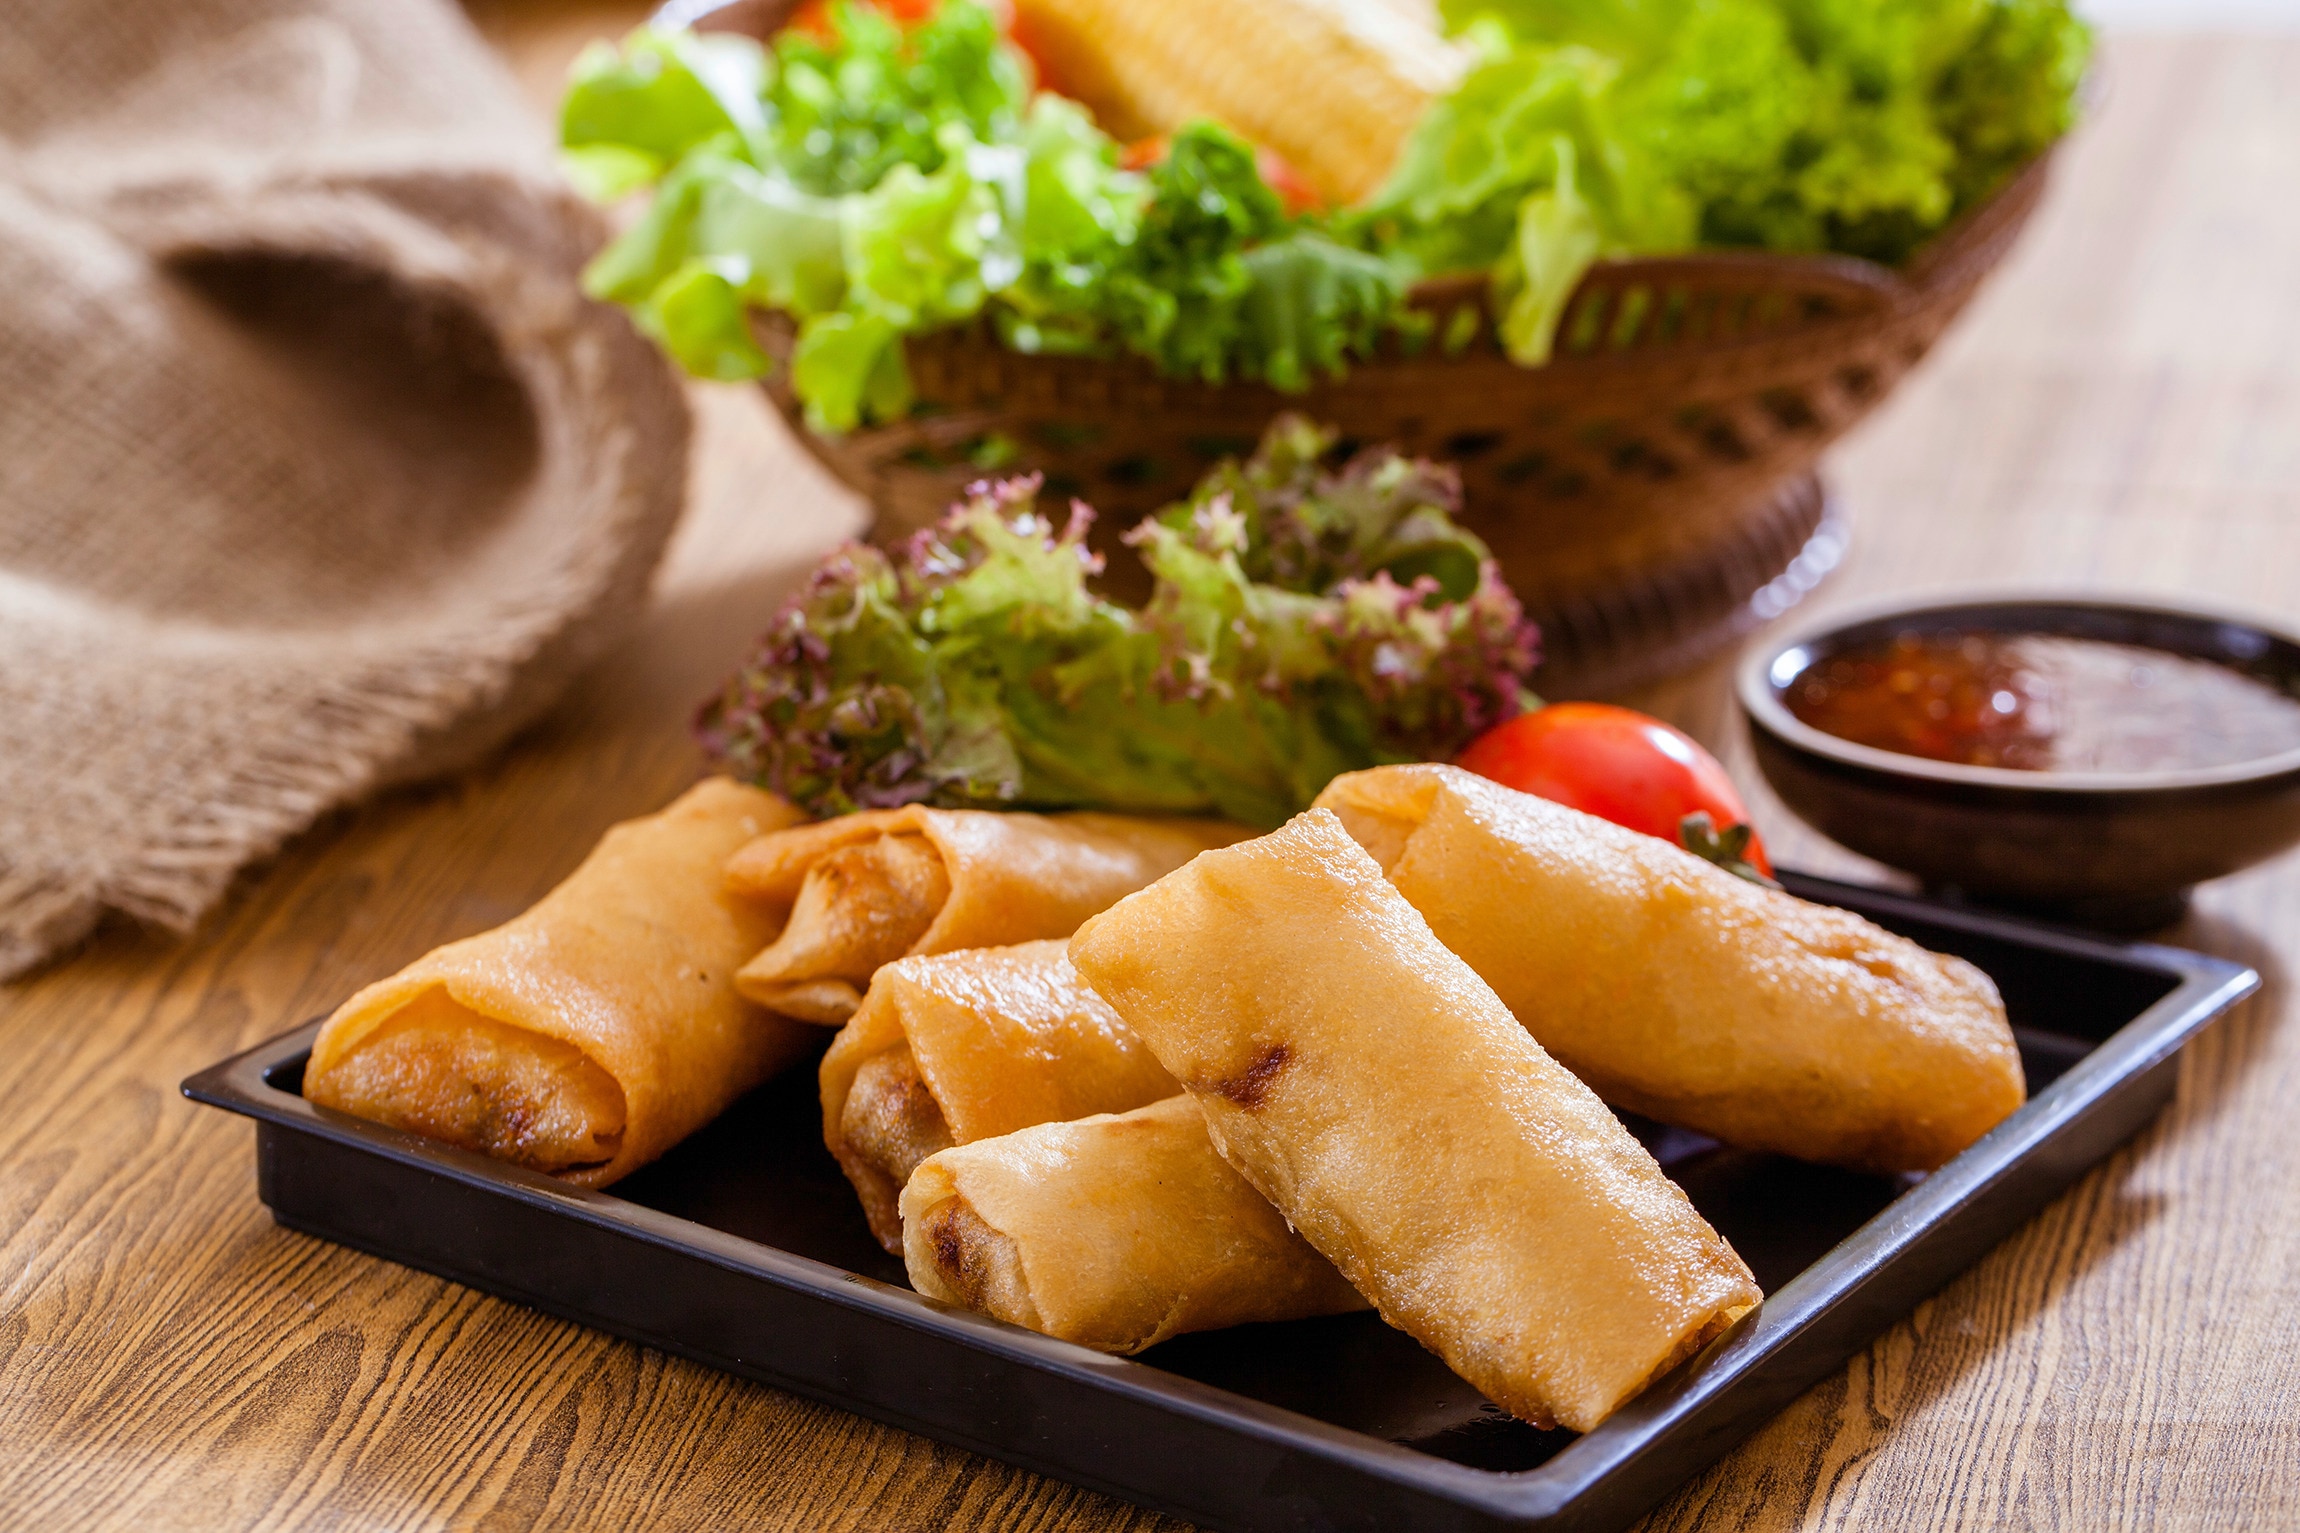 A plate of deep-fried spring rolls served with lettuce and a chili sauce